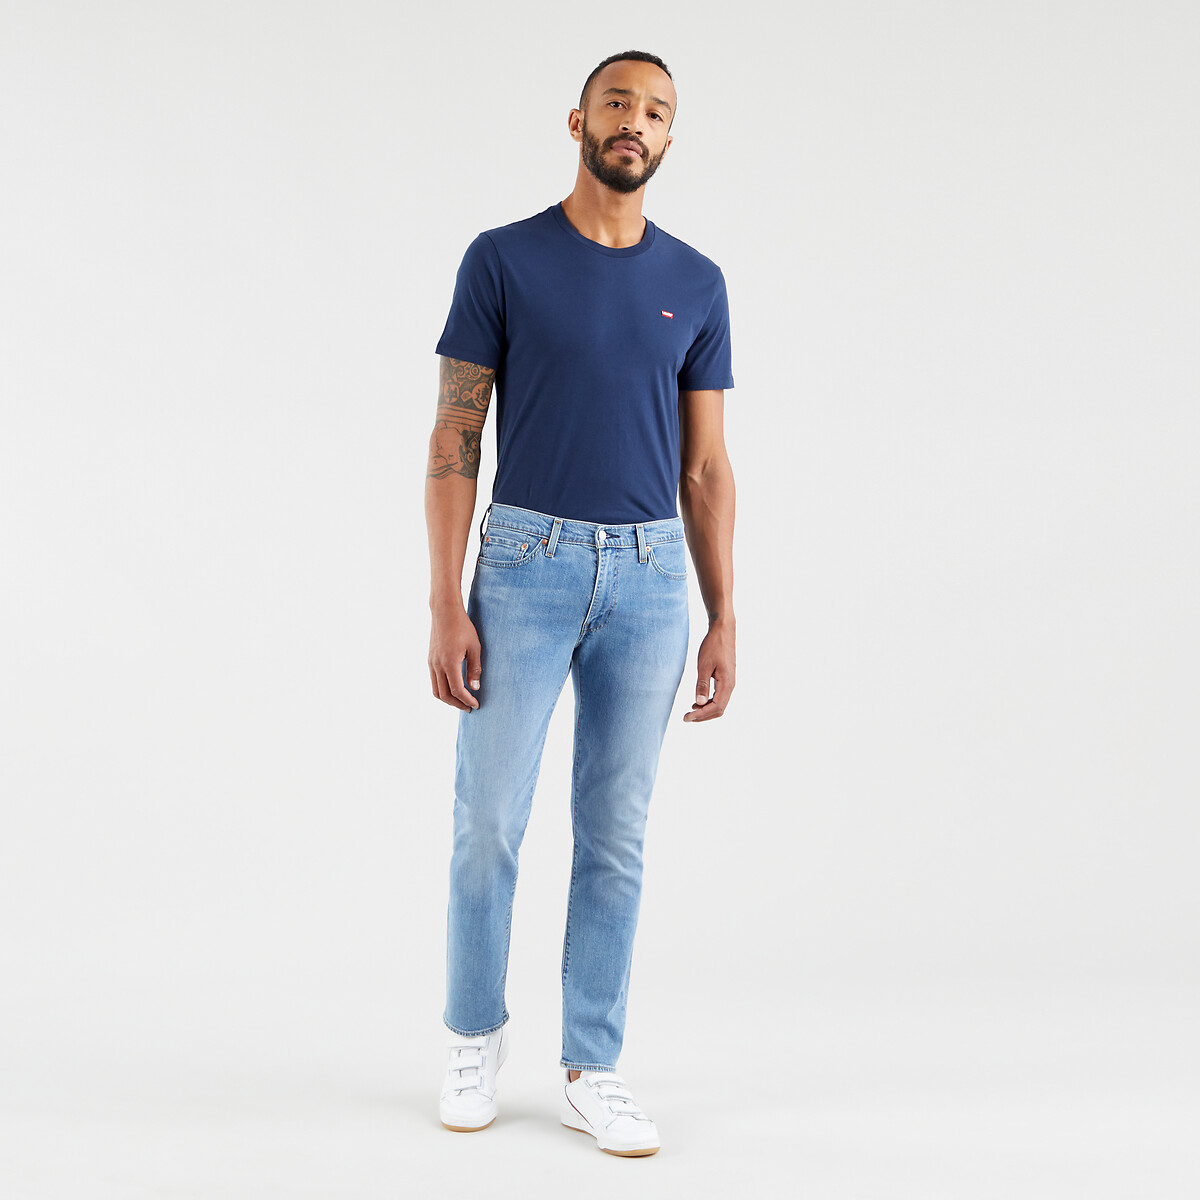 Precipice Immigration pull the wool over eyes Jean slim homme pas cher | La Redoute